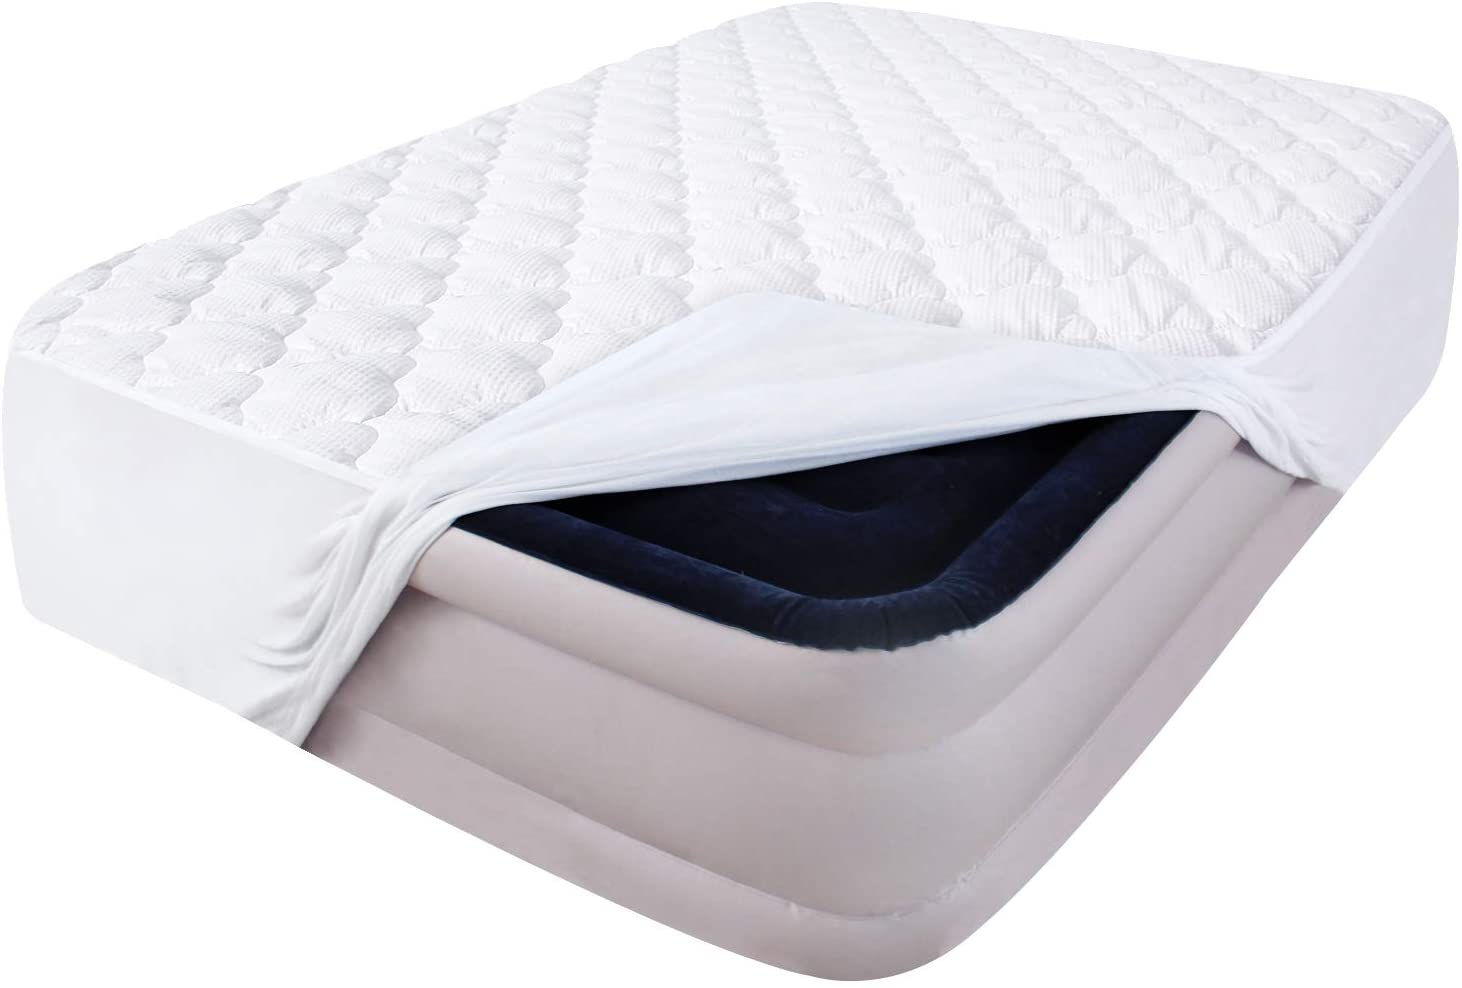 sheets for a 4 inch mattress